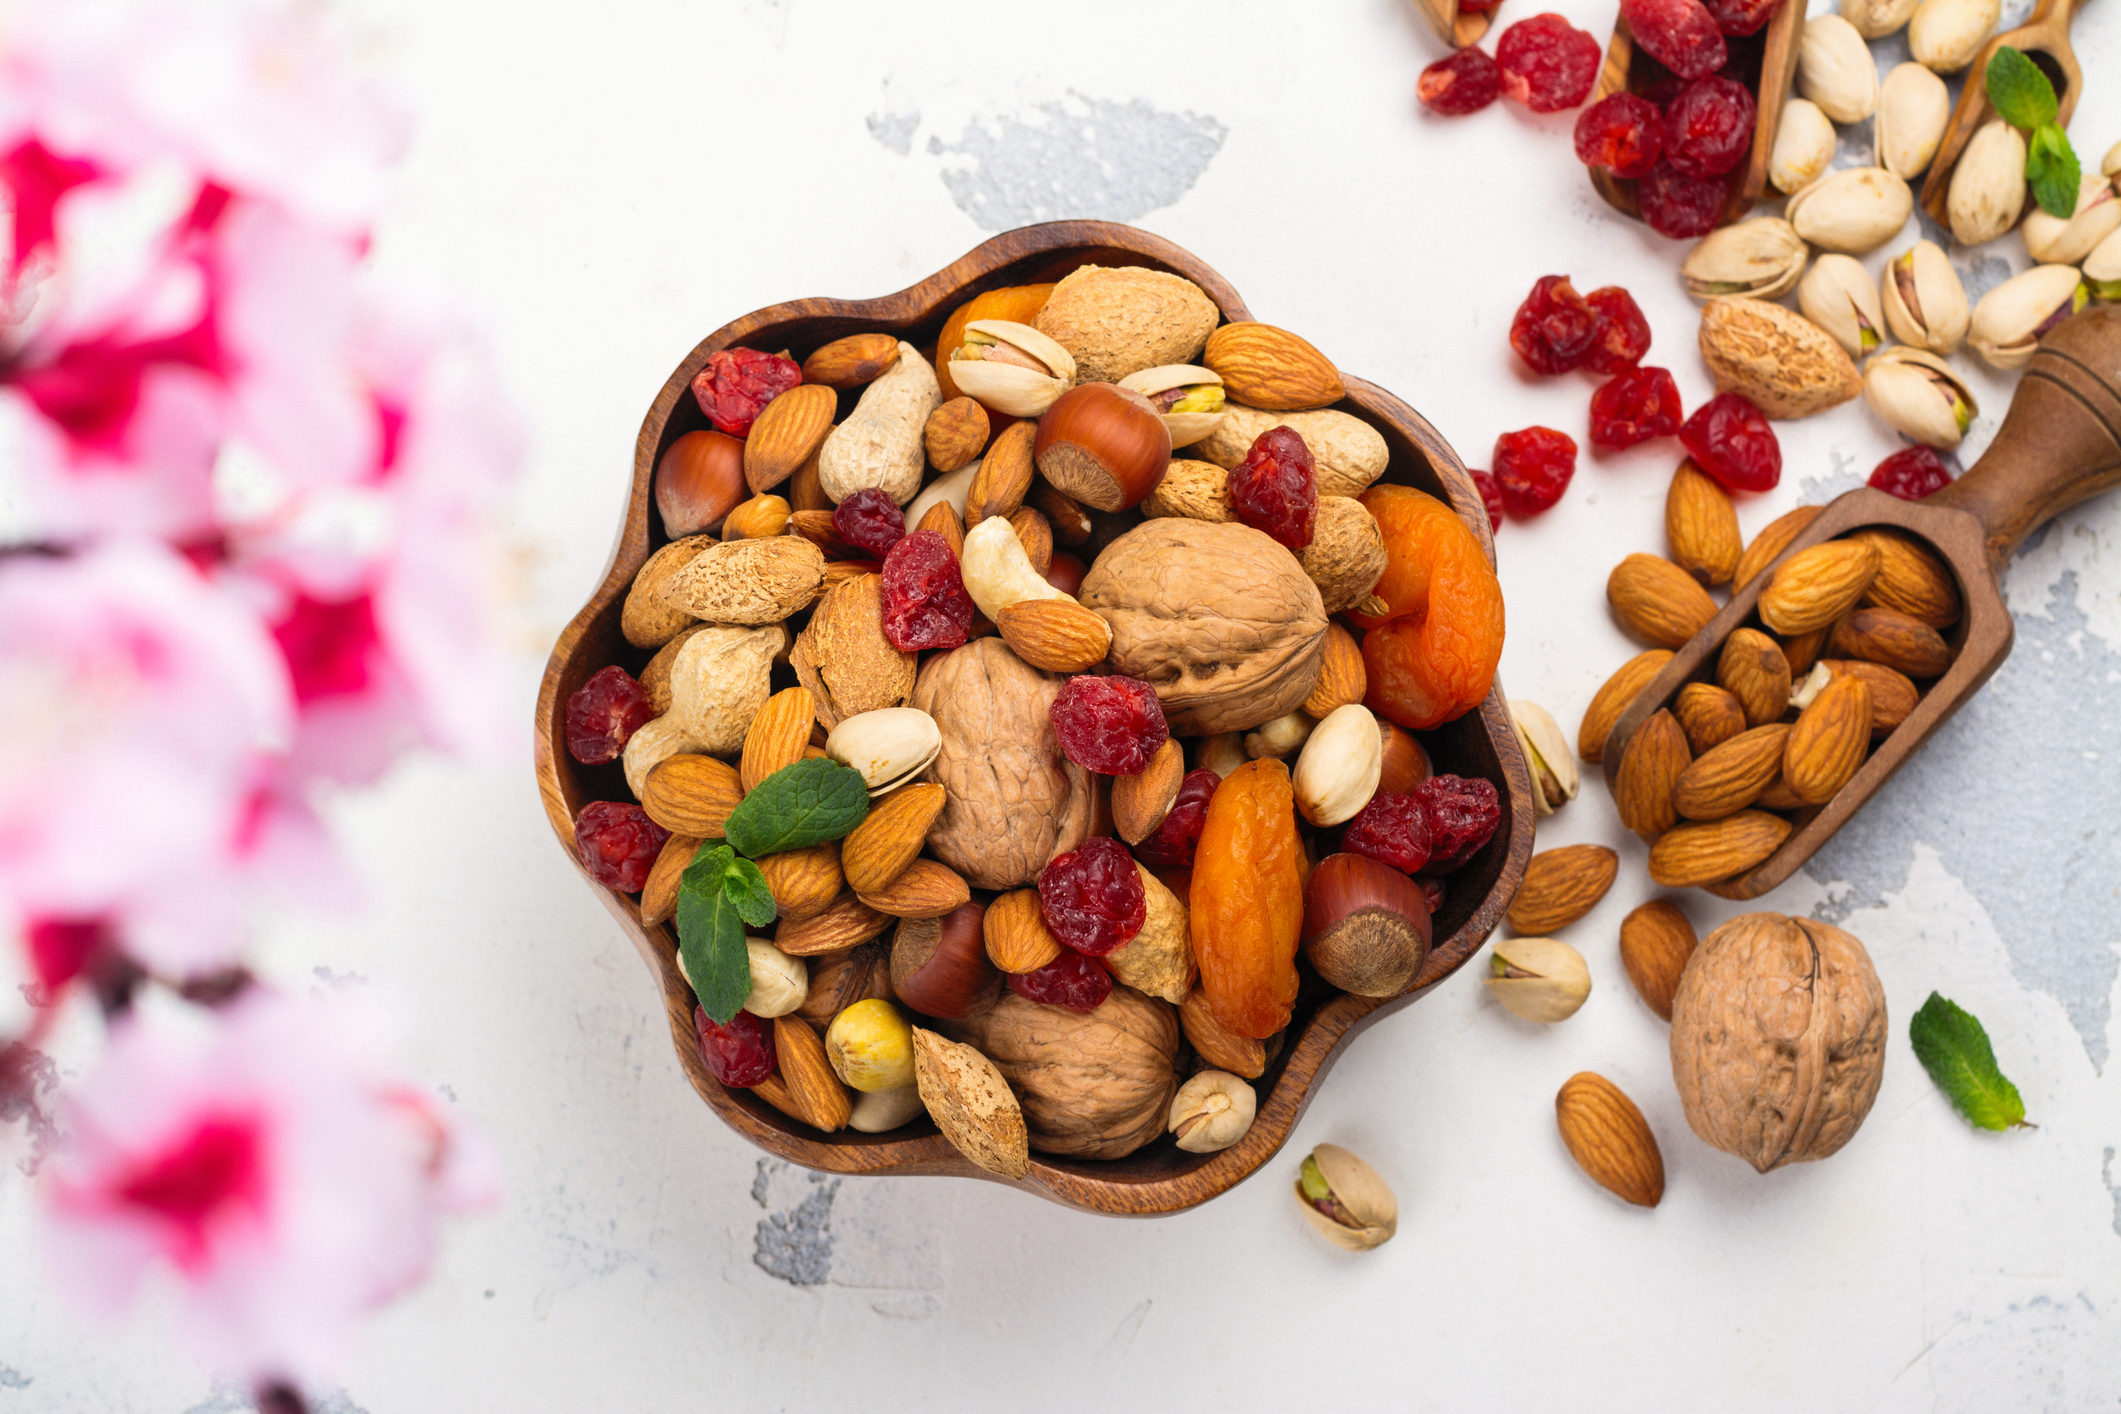 Assortment of dry fruits and nuts. (Photo: iStock - happy_lark)